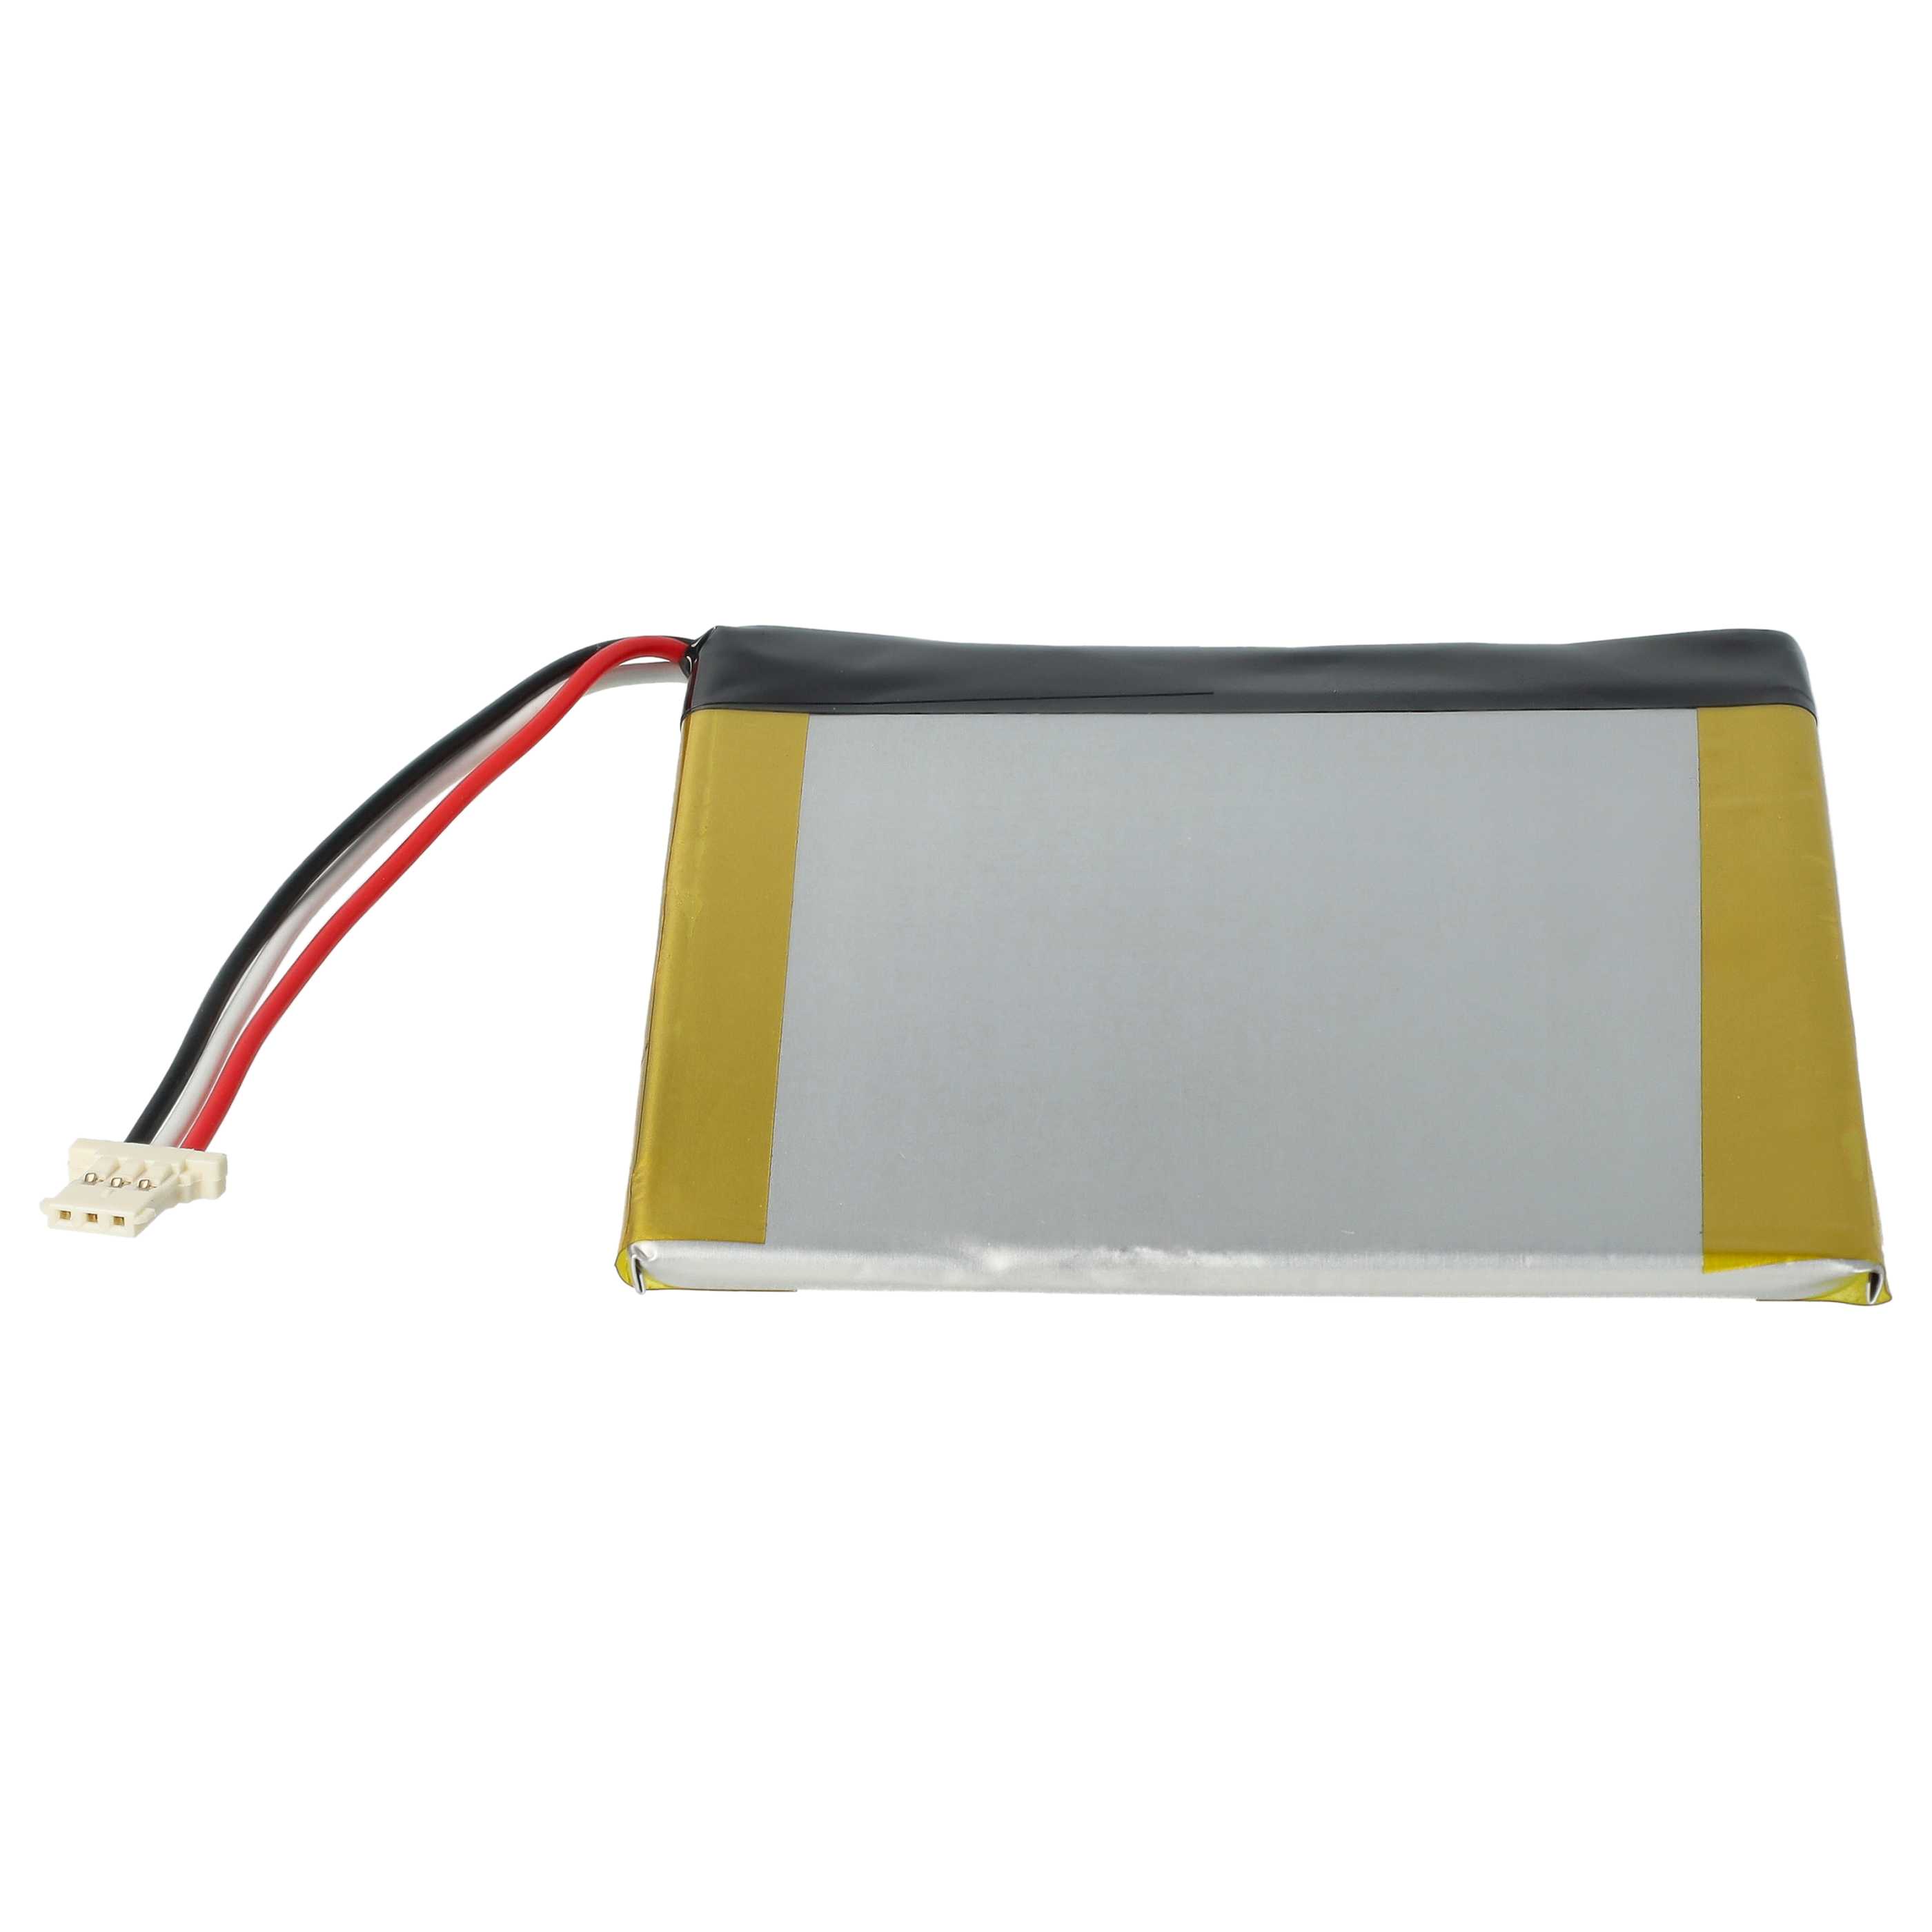 E-Book Battery Replacement for Amazon 26S1019, 58-000226 - 900mAh 3.7V Li-polymer